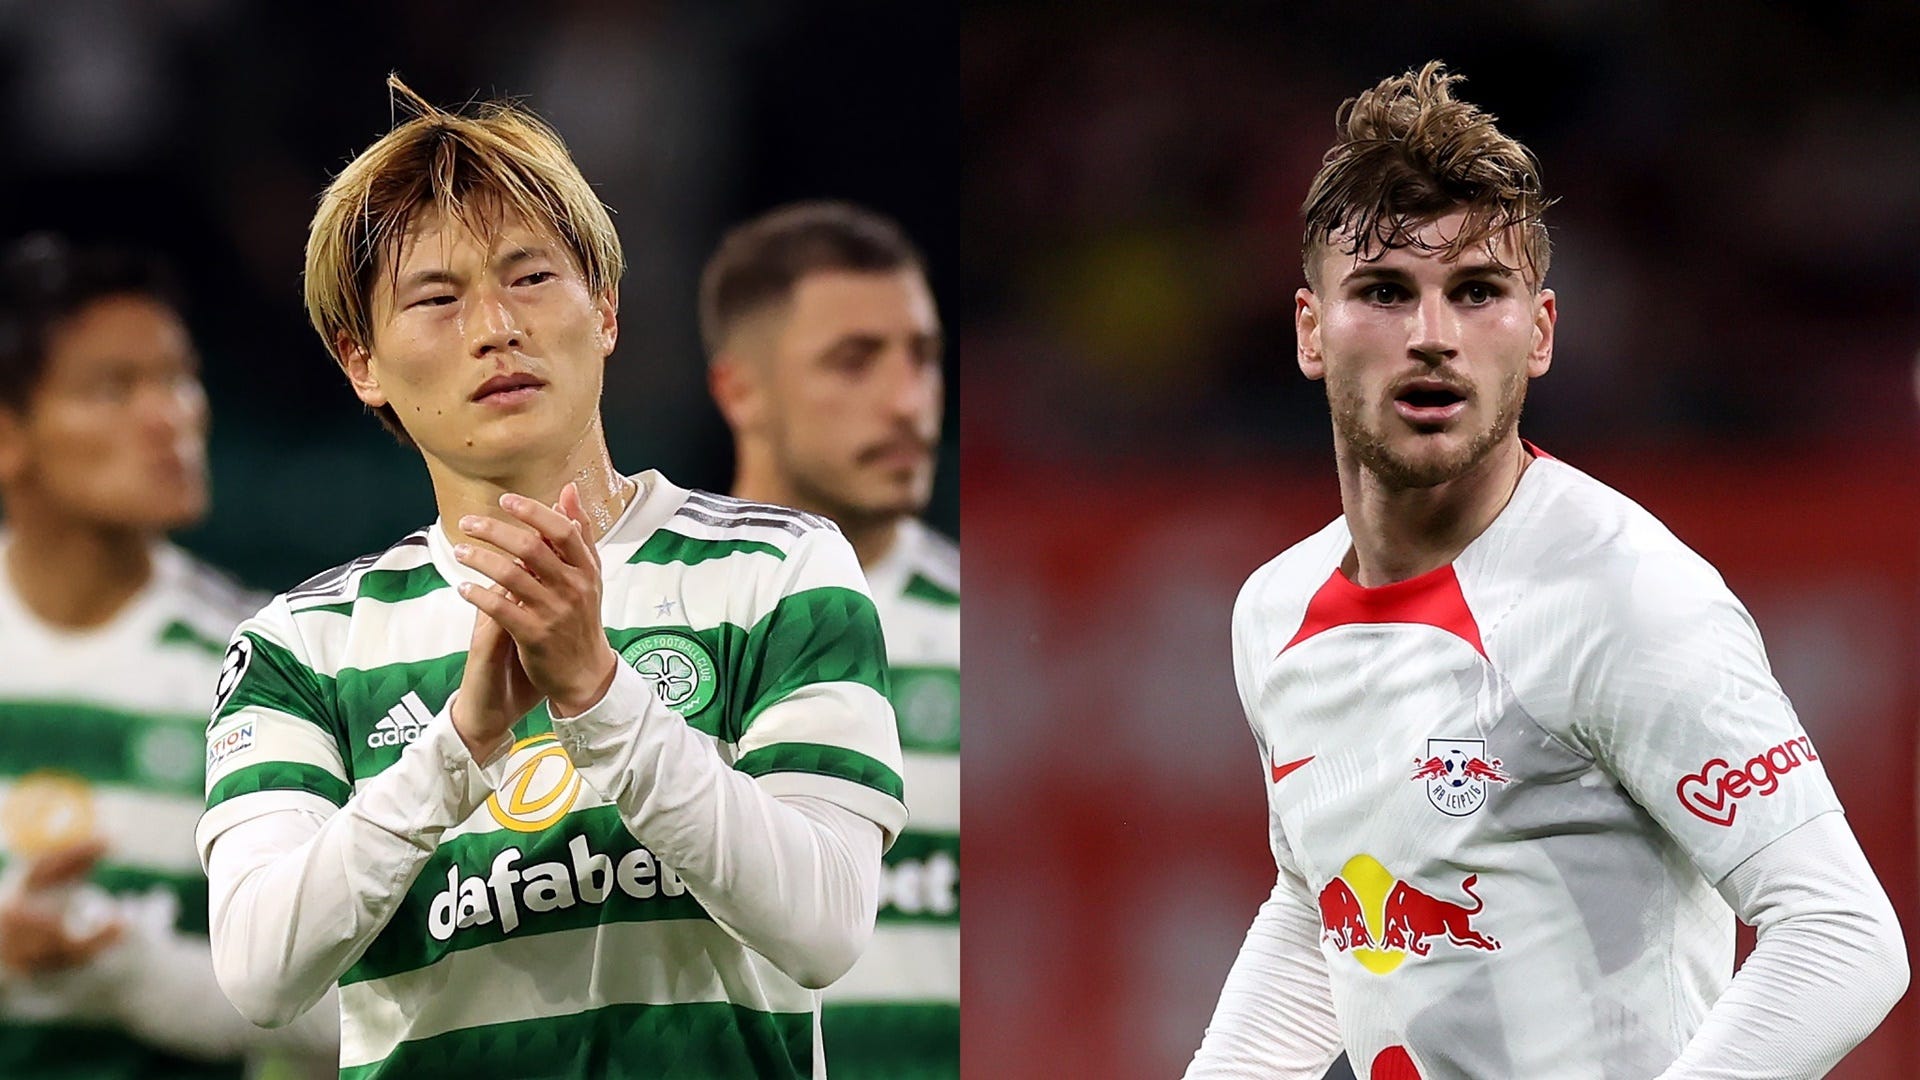 Celtic vs RB Leipzig Live stream, TV channel, kick-off time and where to watch Goal